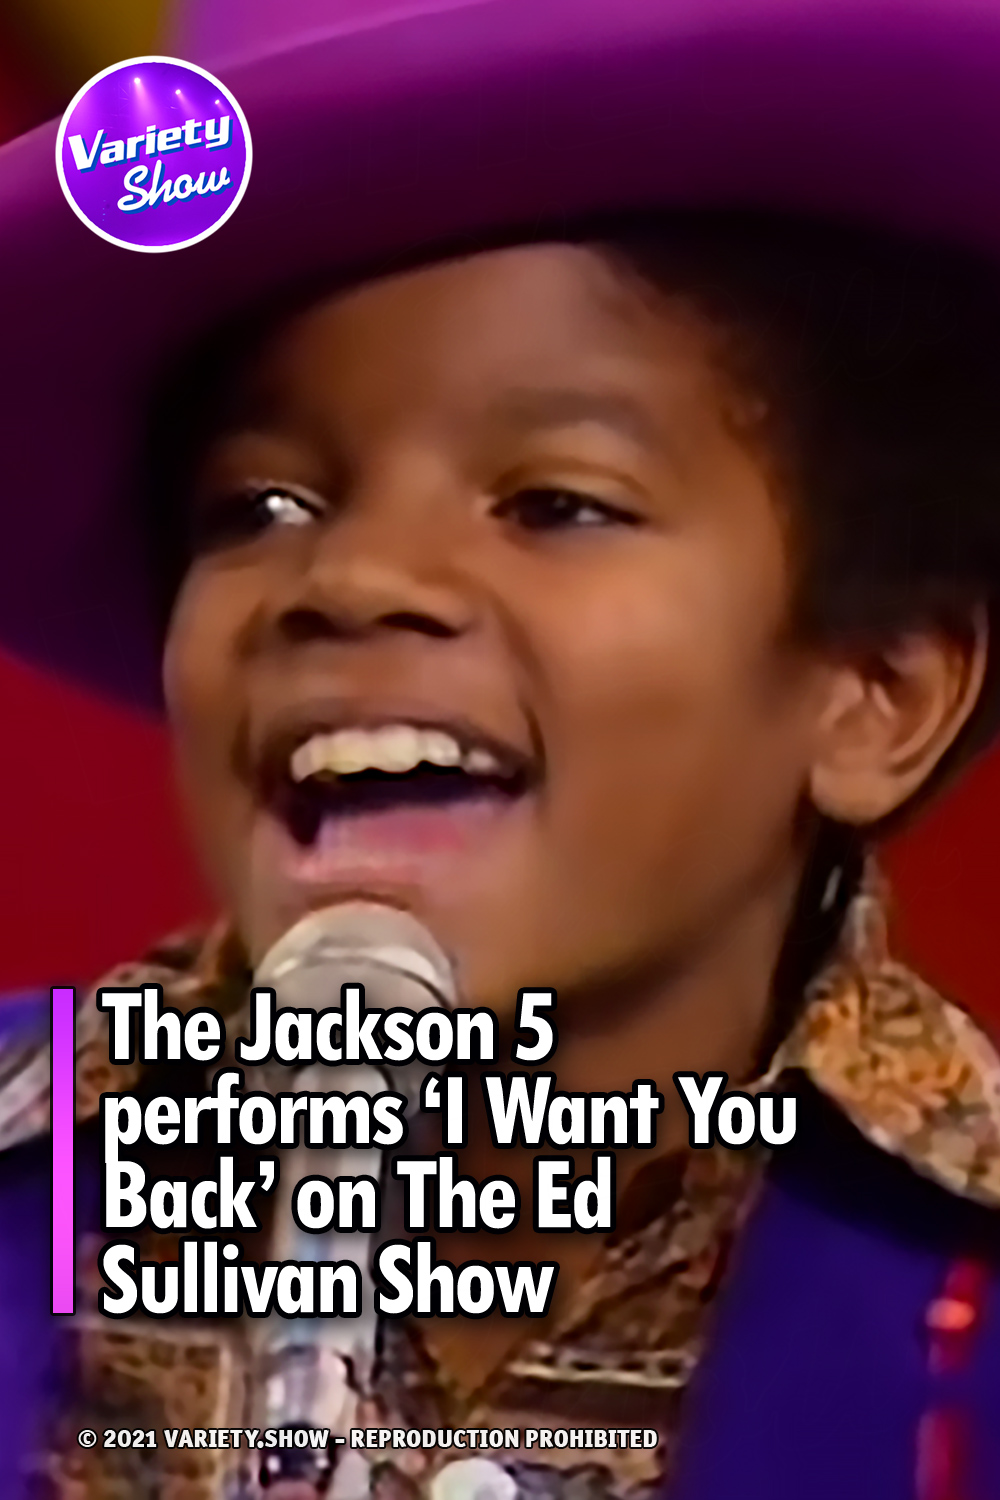 The Jackson 5 performs ‘I Want You Back’ on The Ed Sullivan Show